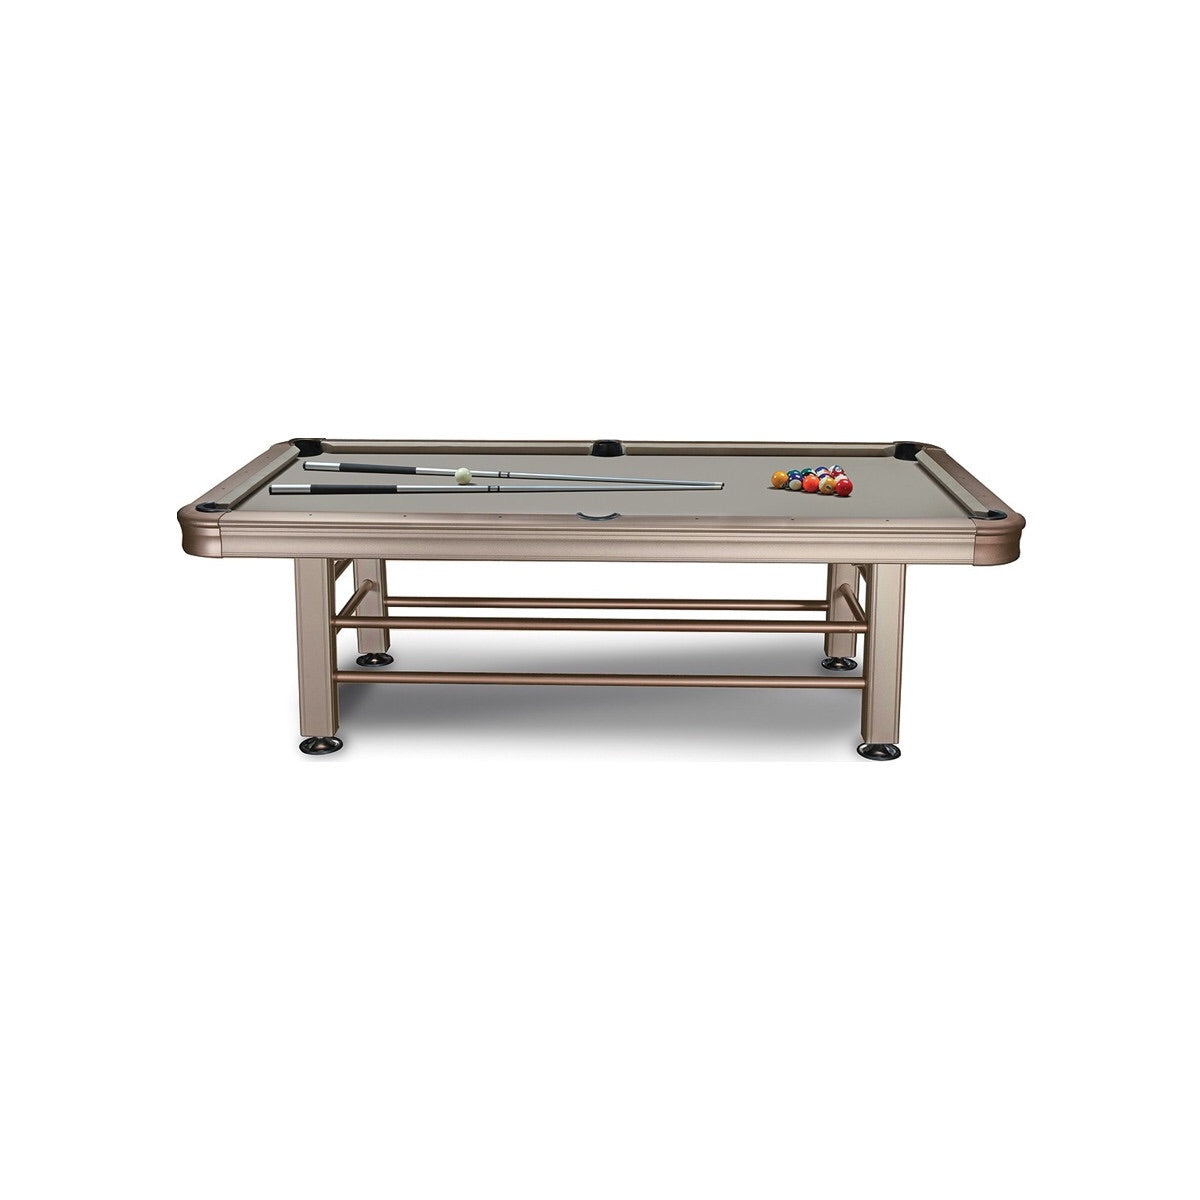 Imperial 8' Outdoor Pool Table with Accessories